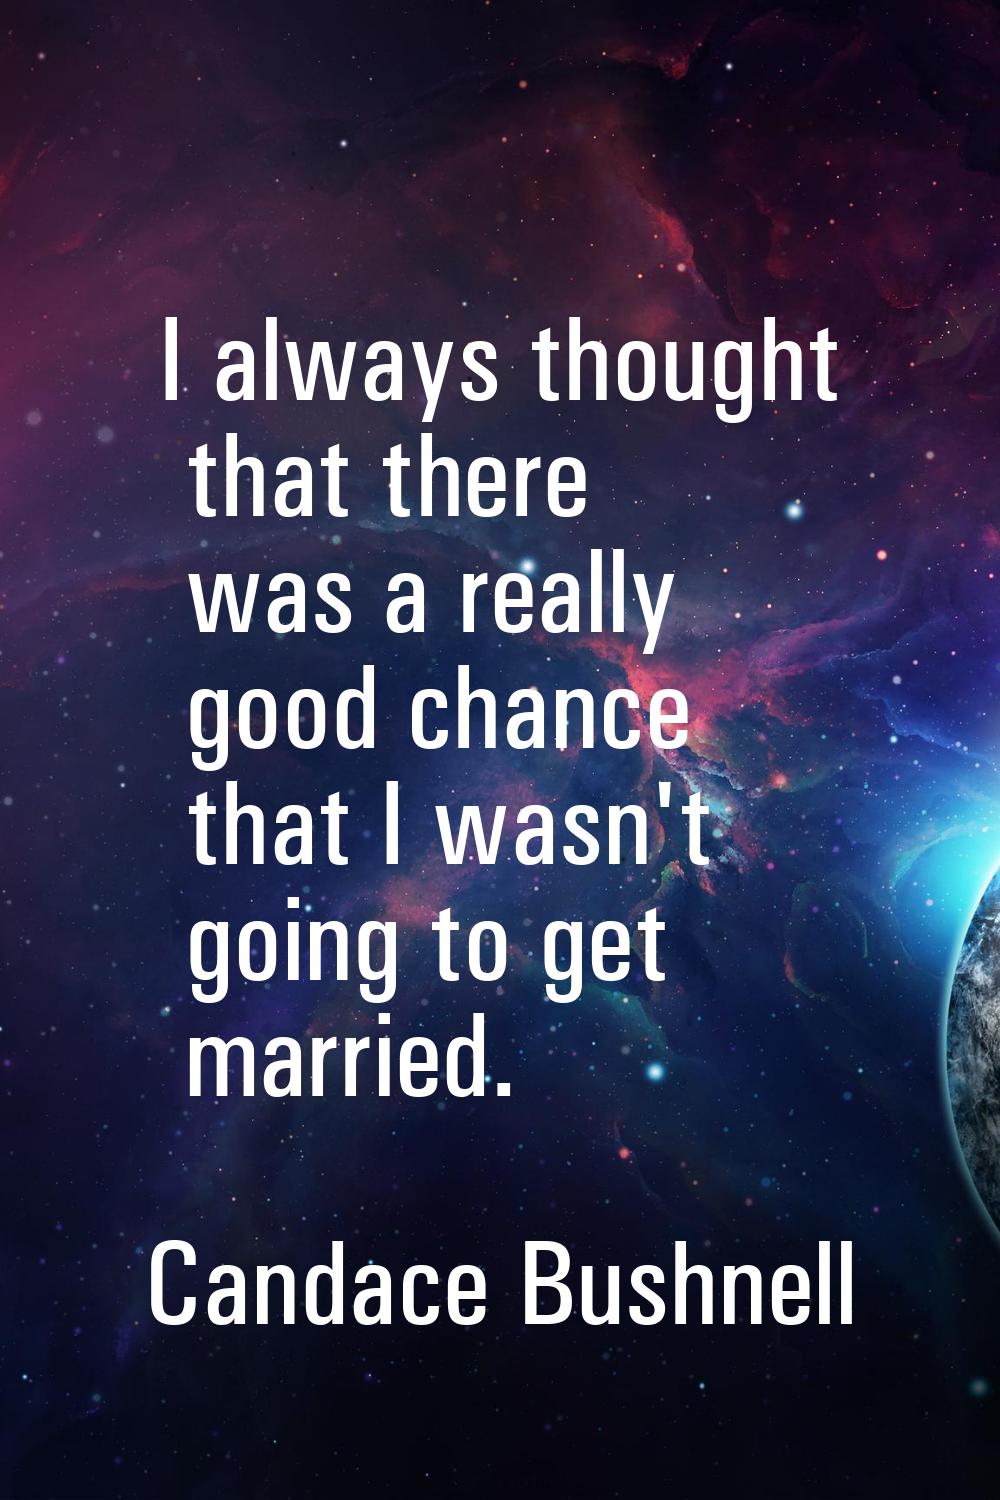 I always thought that there was a really good chance that I wasn't going to get married.